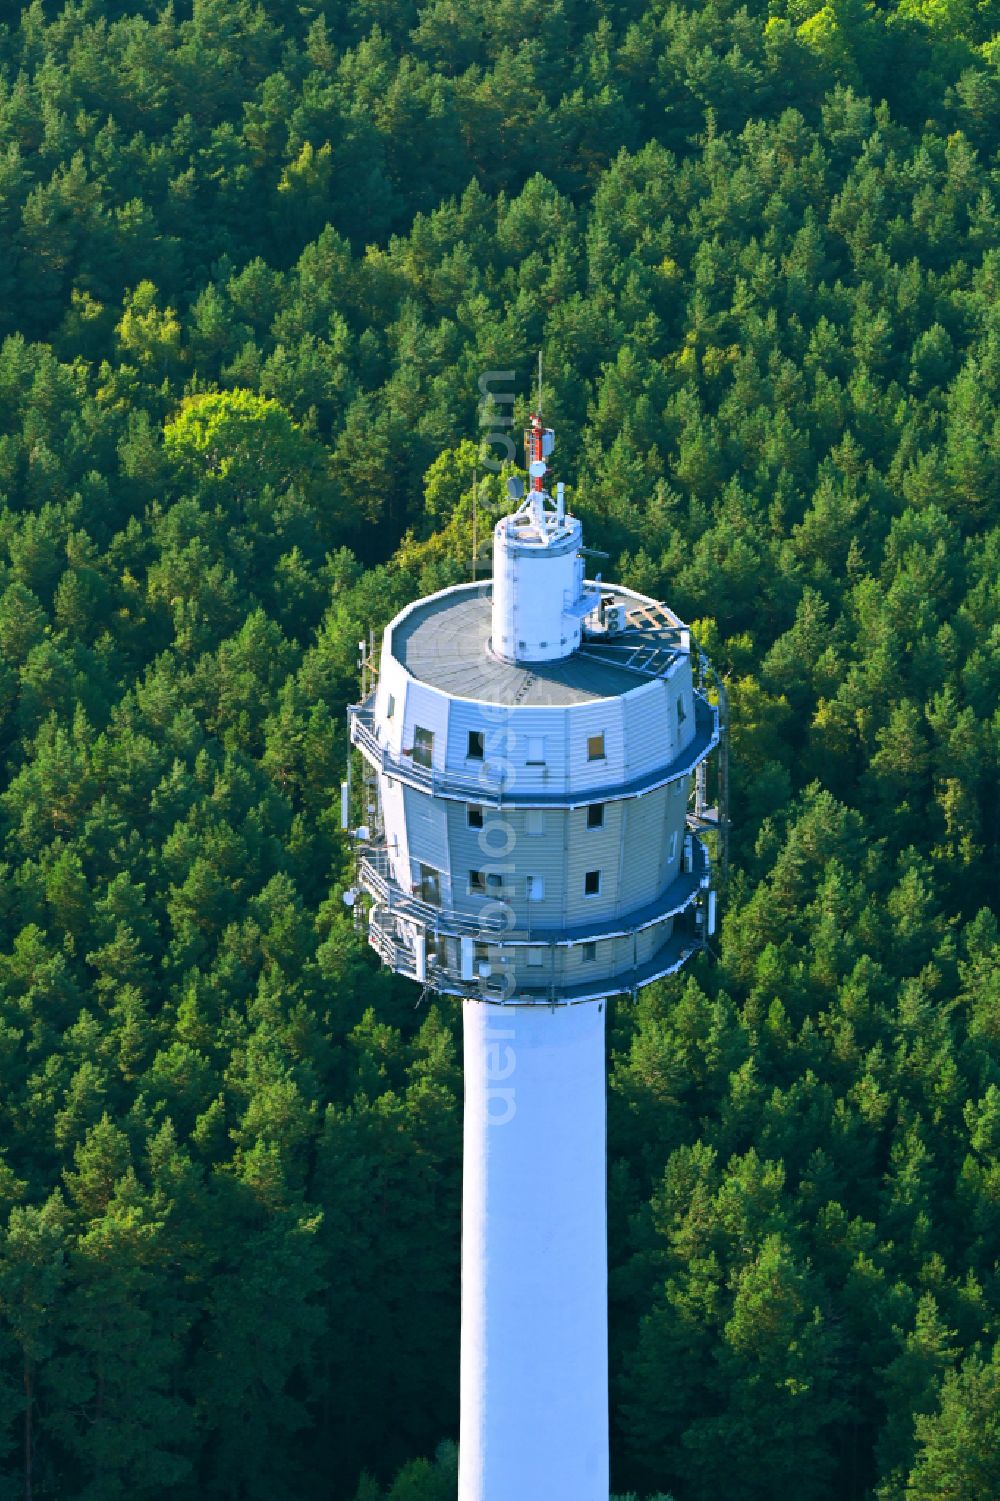 Blumberg from above - Funkturm and transmission system as basic network transmitter in Birkholzaue in the state Brandenburg